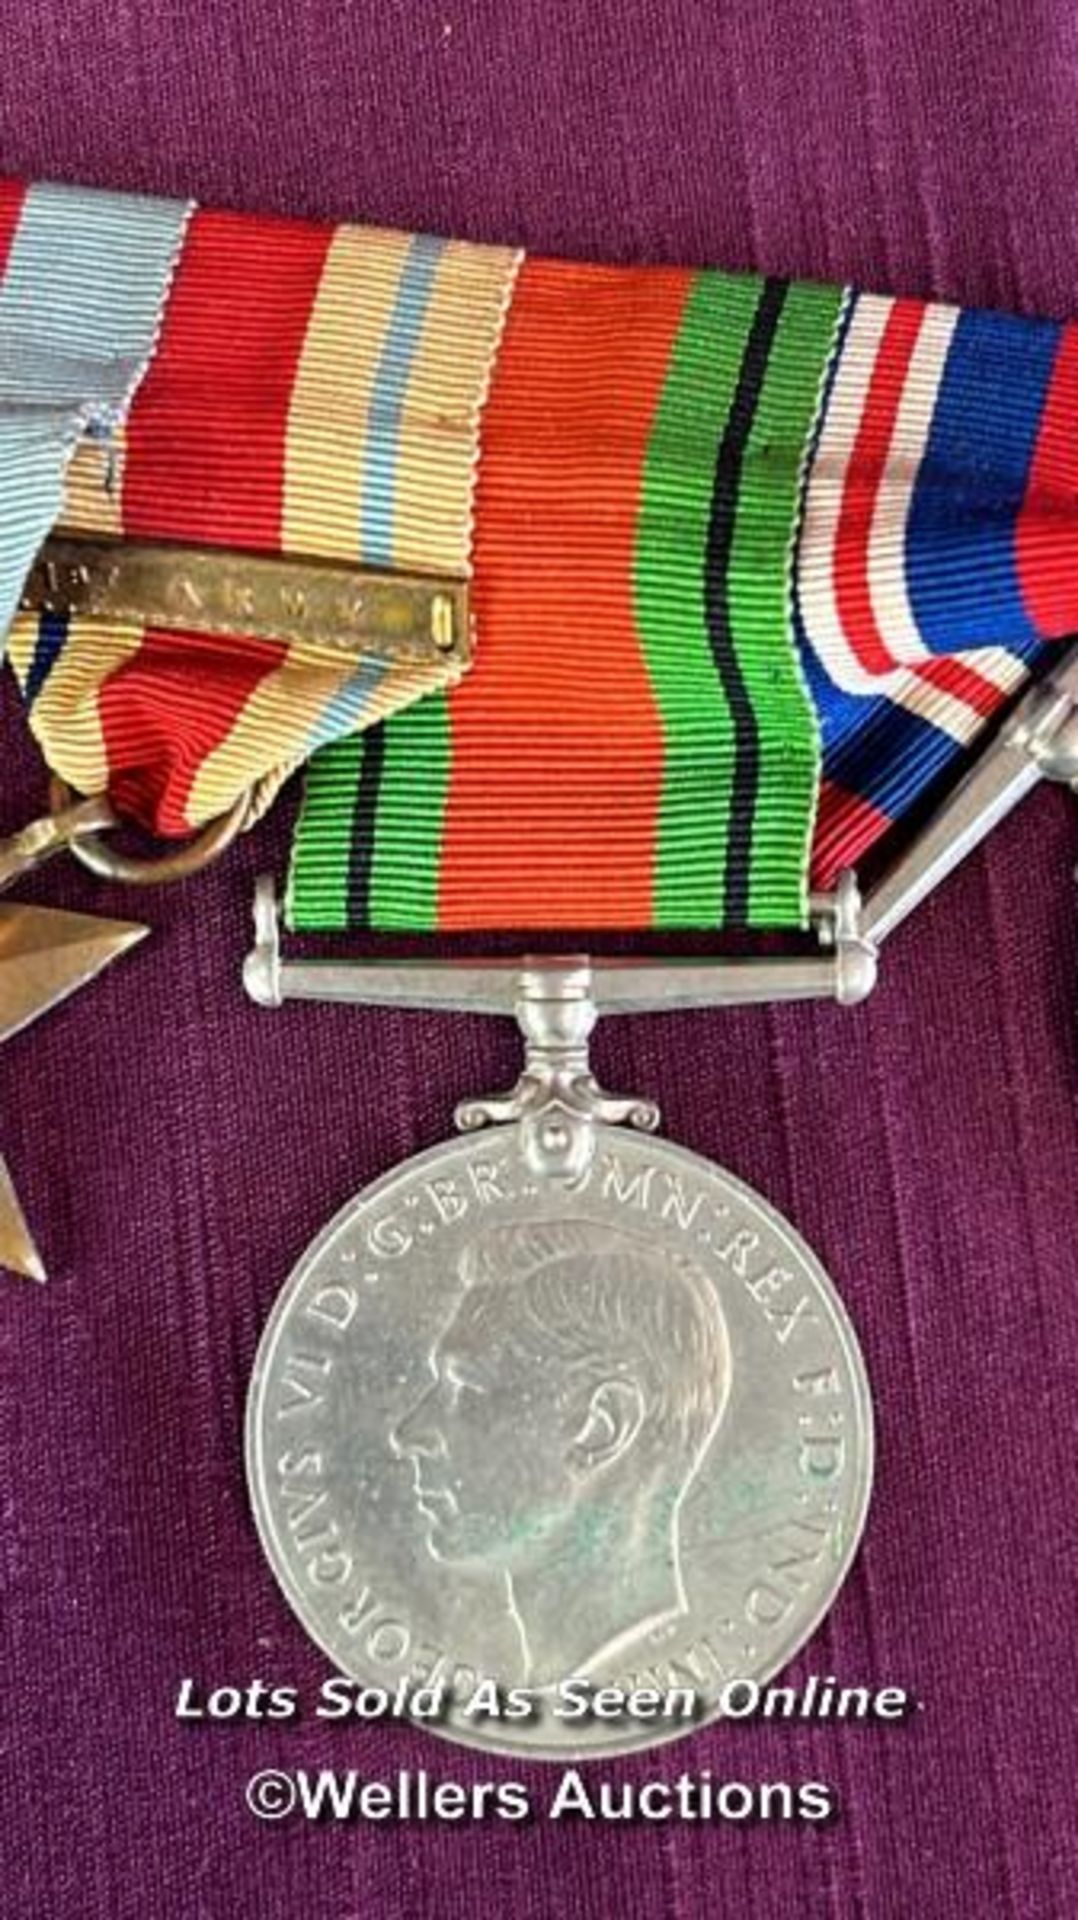 SET OF ASSORTED WORLD WAR ONE AND WORLD WAR TWO MILITARY MEDALS AWARDED TO LIEUTENANT J. W. BUCKLEY, - Image 12 of 22